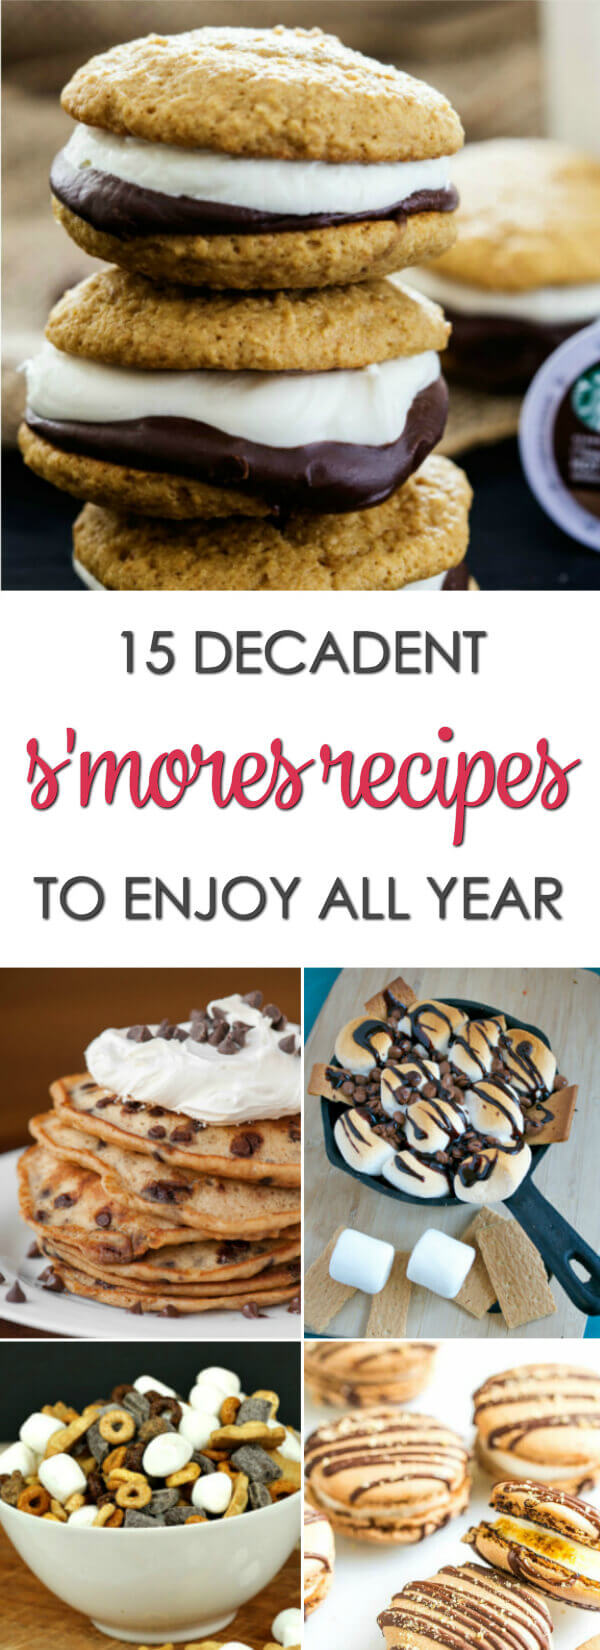 15 Decadent s'mores recipes that are perfect all year round